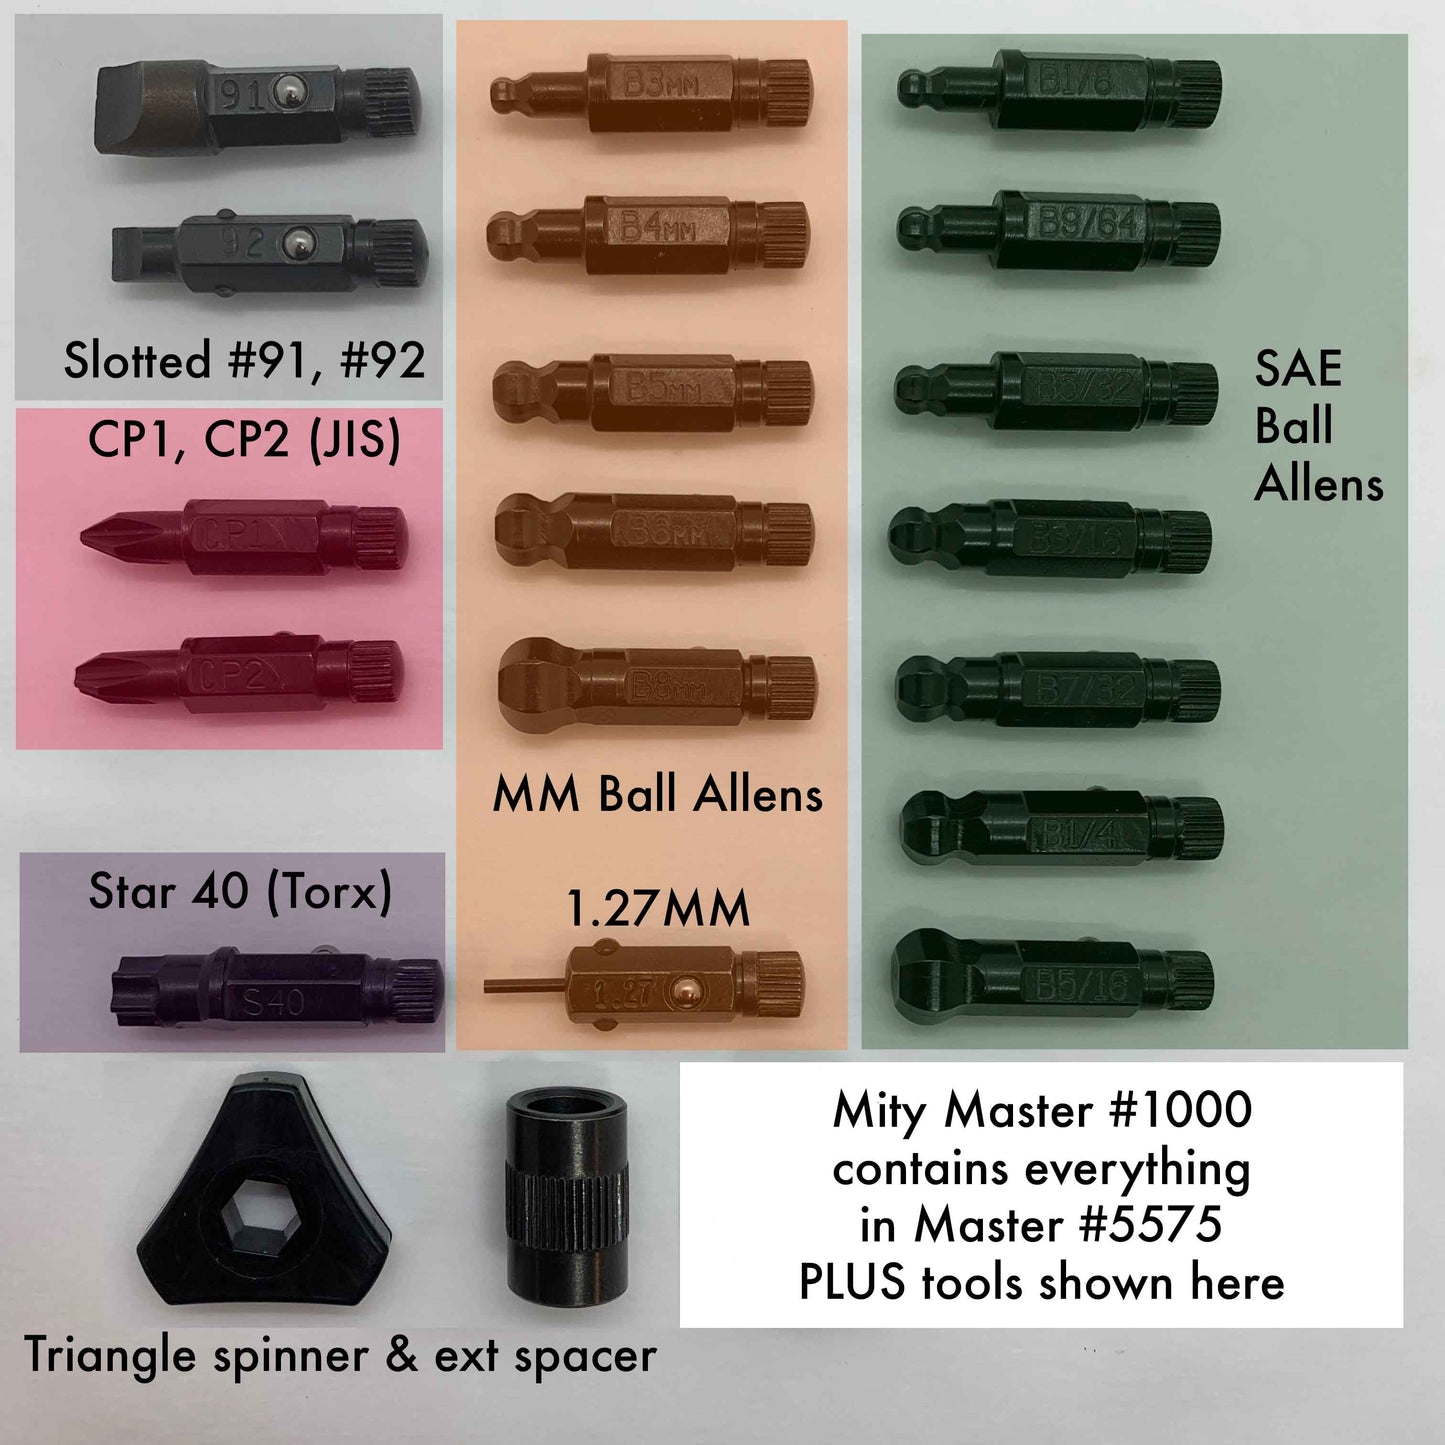 Mity Master #1000 Set contains everything in the Master Set #5575 PLUS 20 new/additional tools shown here. | Chapman MFG